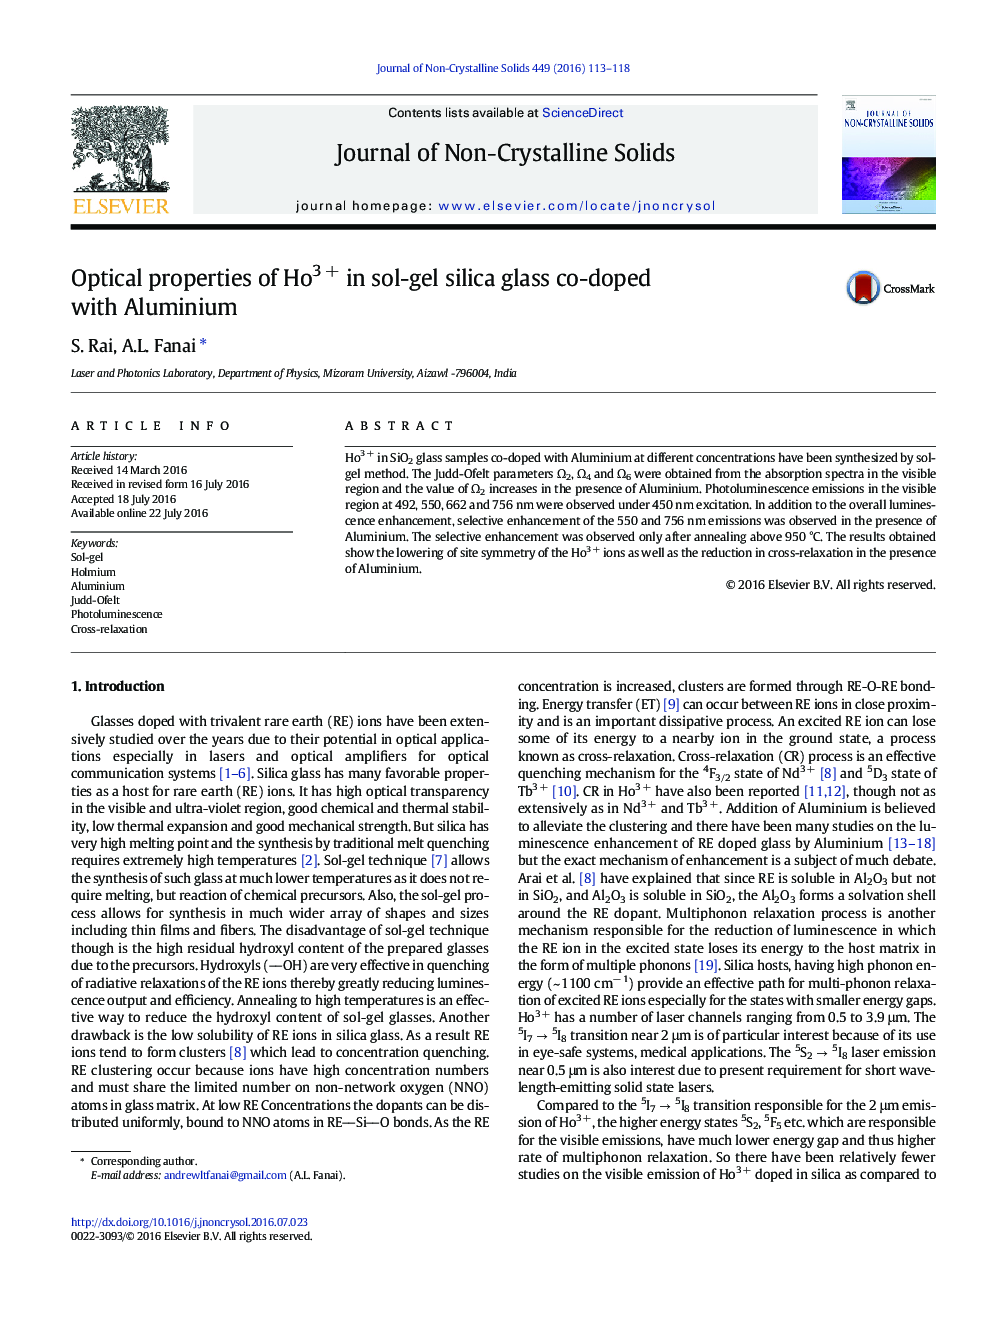 Optical properties of Ho3Â + in sol-gel silica glass co-doped with Aluminium